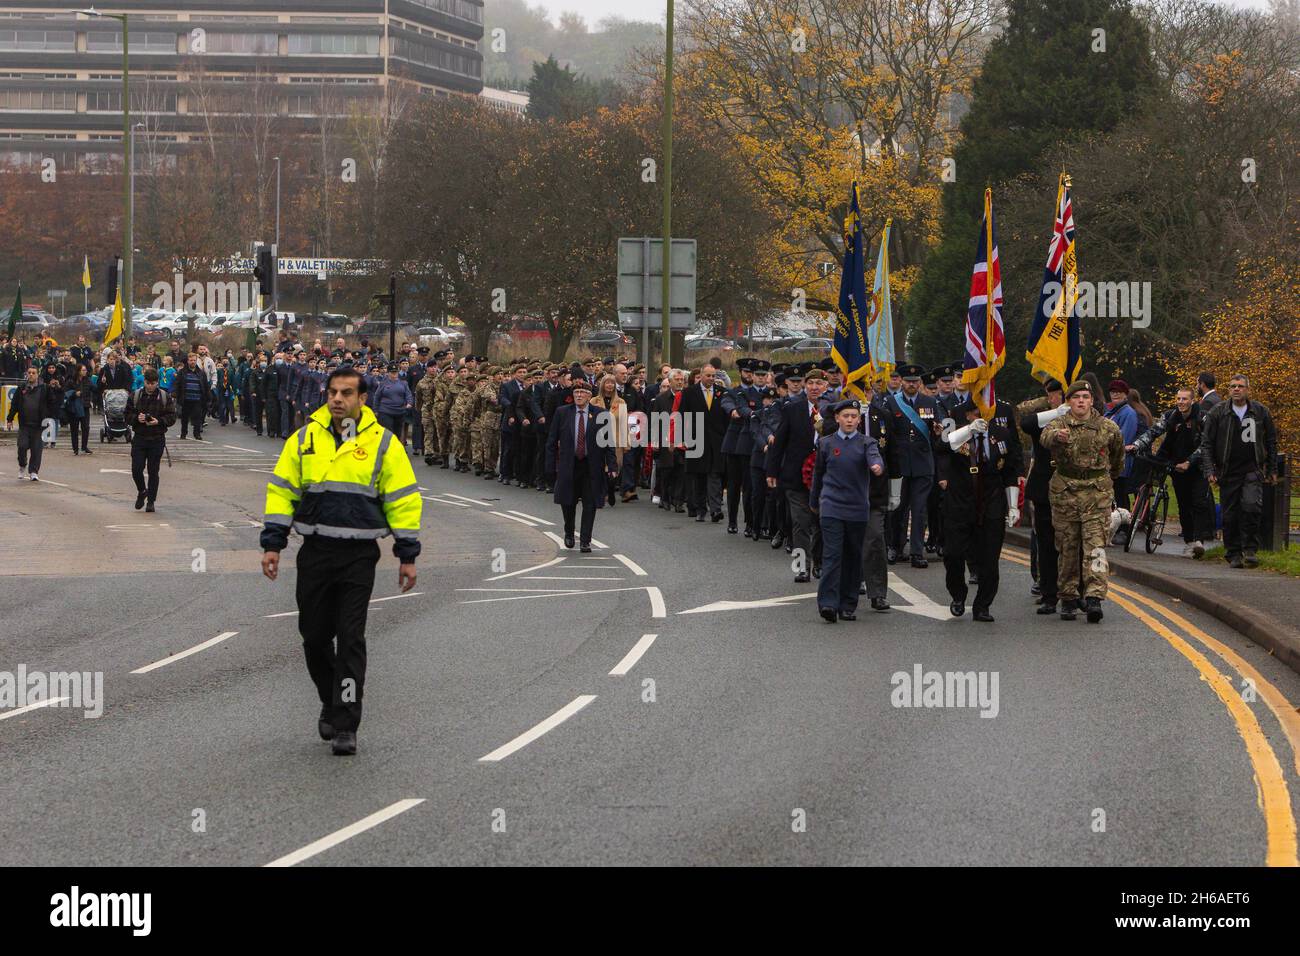 Hemel Hempstead, UK. 14th Nov, 2021. The parade is organised by The Royal British Legion and RAF Halton. The march begins in Hemel Hempstead town centre at 10.30 am and will conclude at the War Memorial. Wreaths will be laid at the War Memorial at St. John’s Church followed by a church service.. ©Enrique Guadiz/Alamy Live News Stock Photo